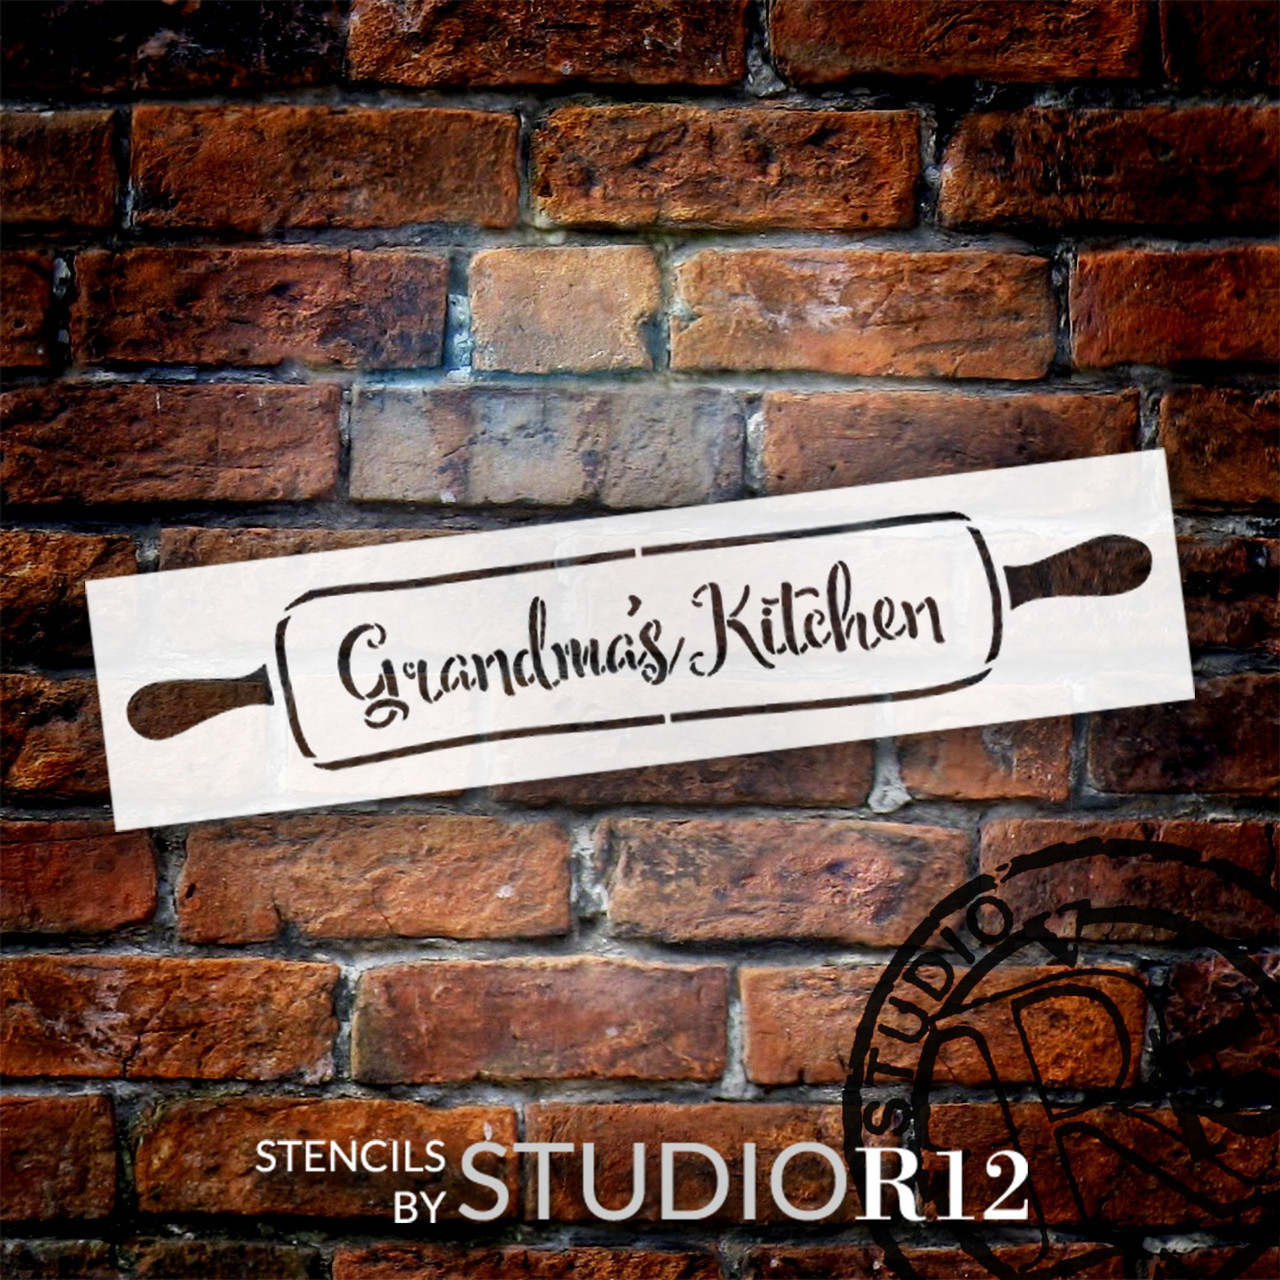 Grandma's Kitchen with Rolling Pin Stencil by StudioR12 - Select Size - USA Made - Craft DIY Farmhouse Kitchen Home Decor | Paint Word Art Wood Sign | Reusable Mylar Template